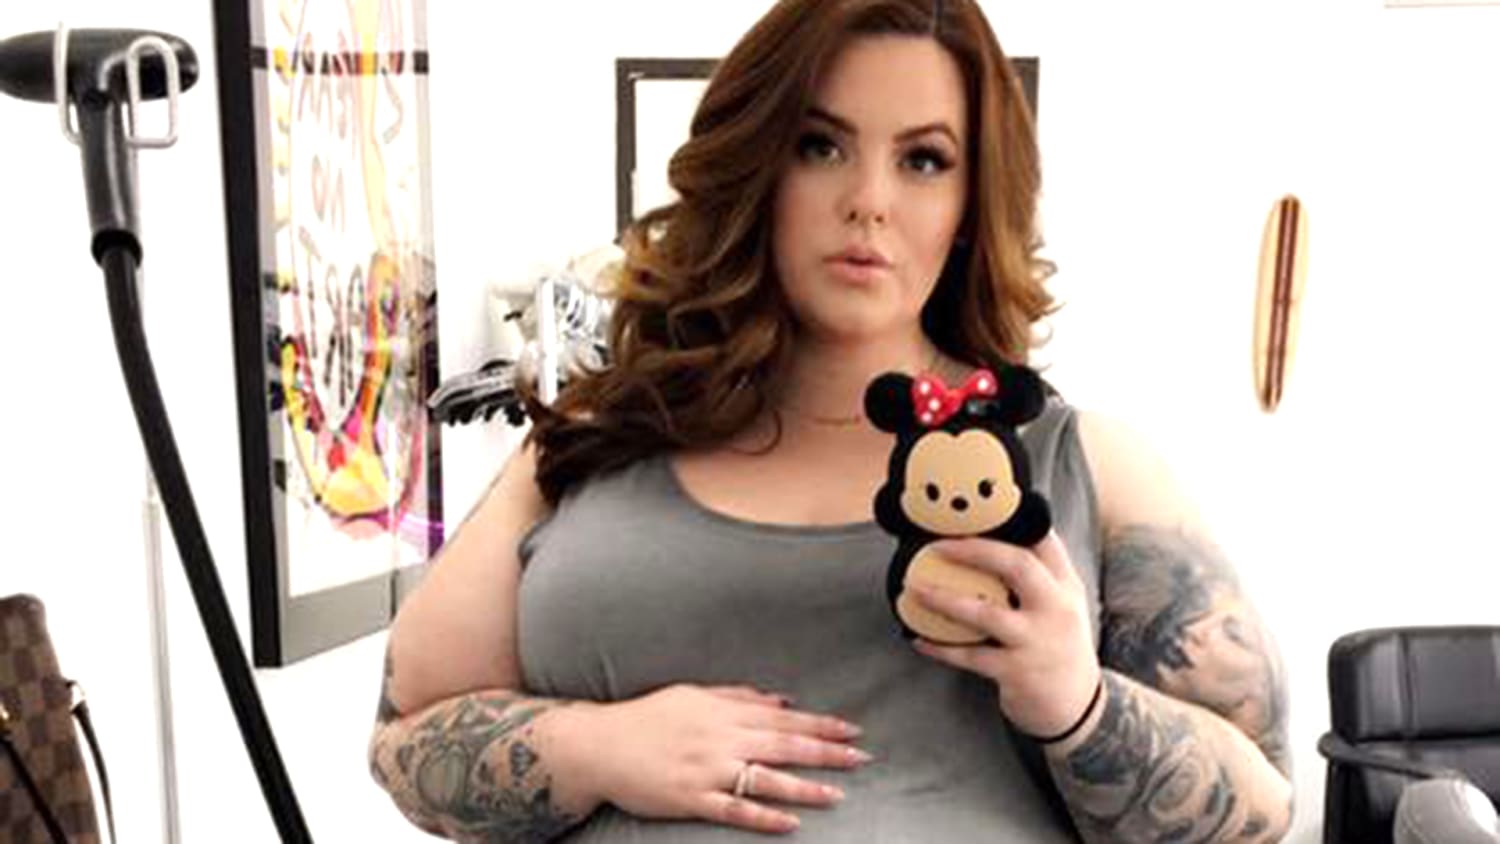 Plus-size model Tess Holliday strikes back after about pregnancy weight